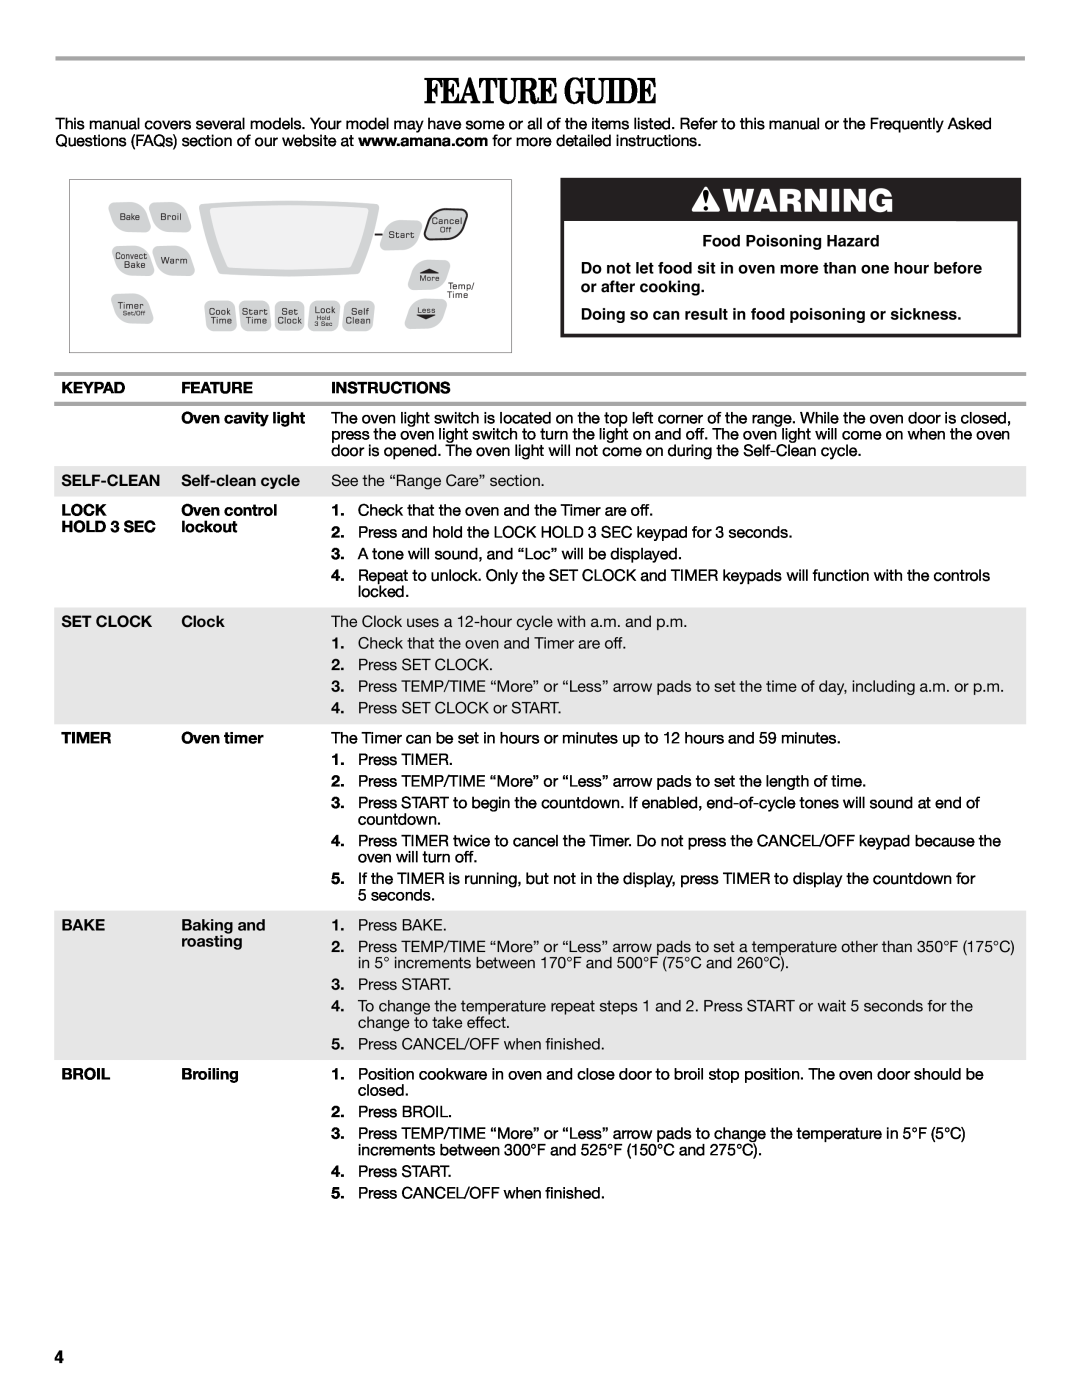 Amana AGR6011VDW warranty Feature Guide, Food Poisoning Hazard, Doing so can result in food poisoning or sickness 